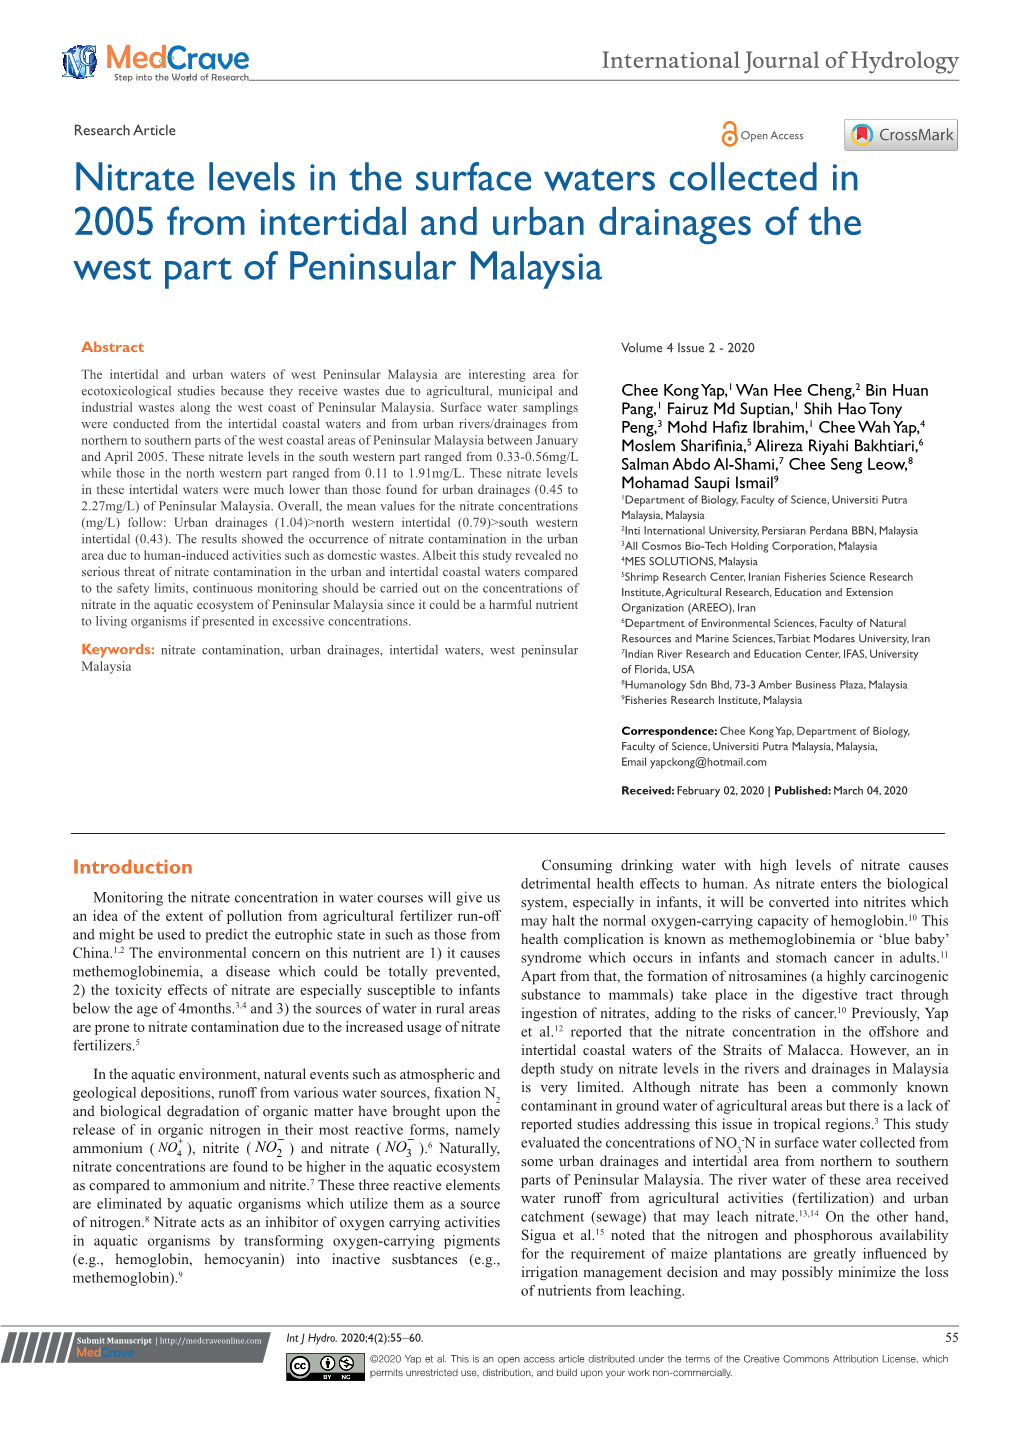 Nitrate Levels in the Surface Waters Collected in 2005 from Intertidal and Urban Drainages of the West Part of Peninsular Malaysia